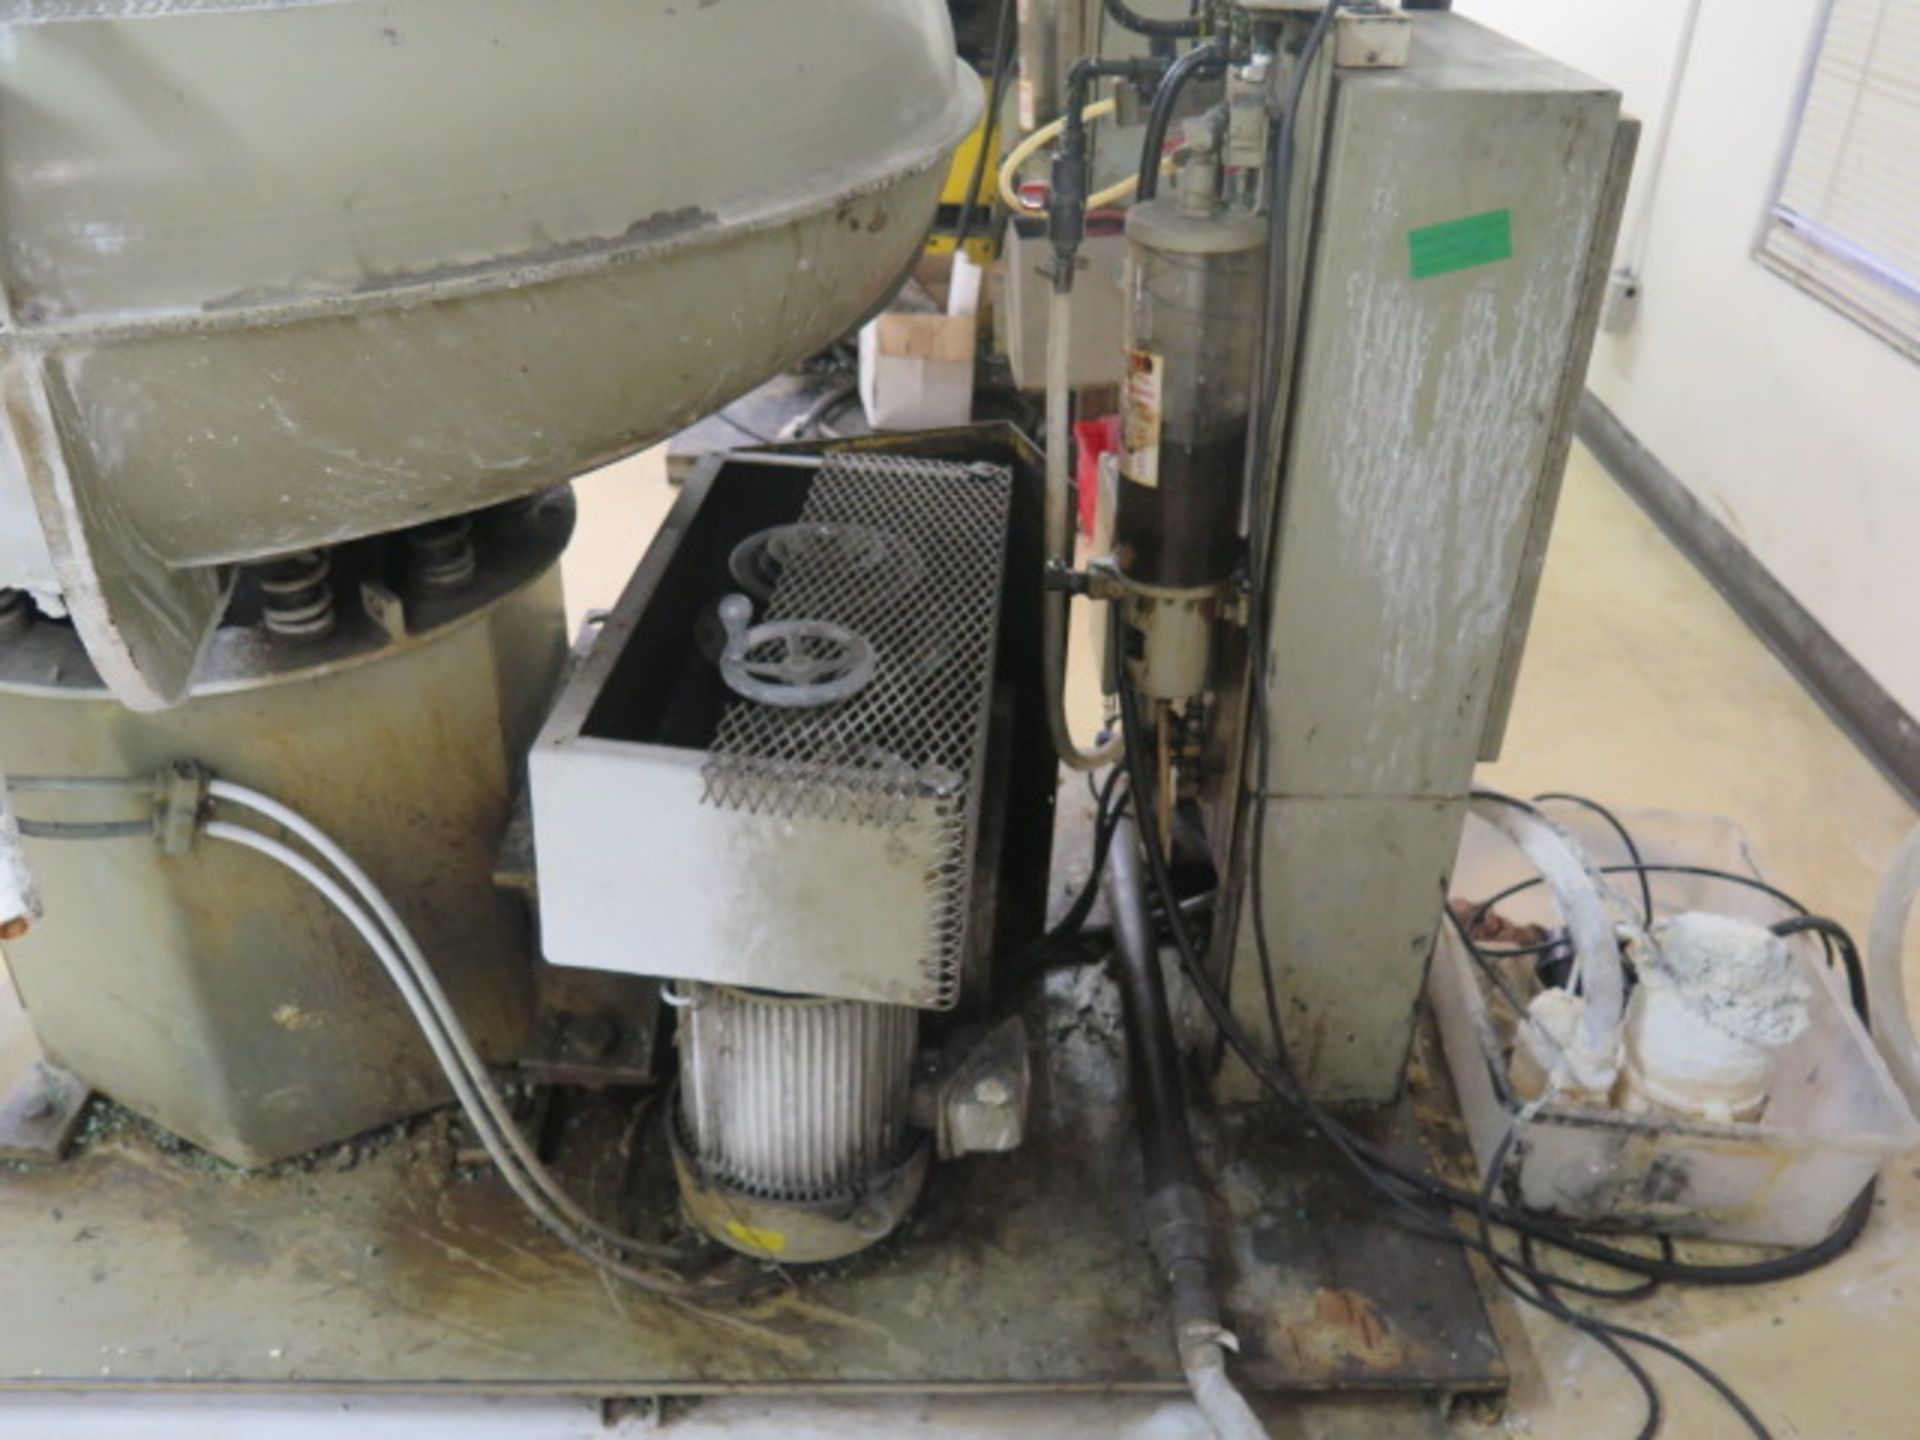 Almco mdl. OR-10V 52” Variable Speed Media Tumbler w/ Speed Controls, Media Tanks and Pumps, Timers, - Image 7 of 7